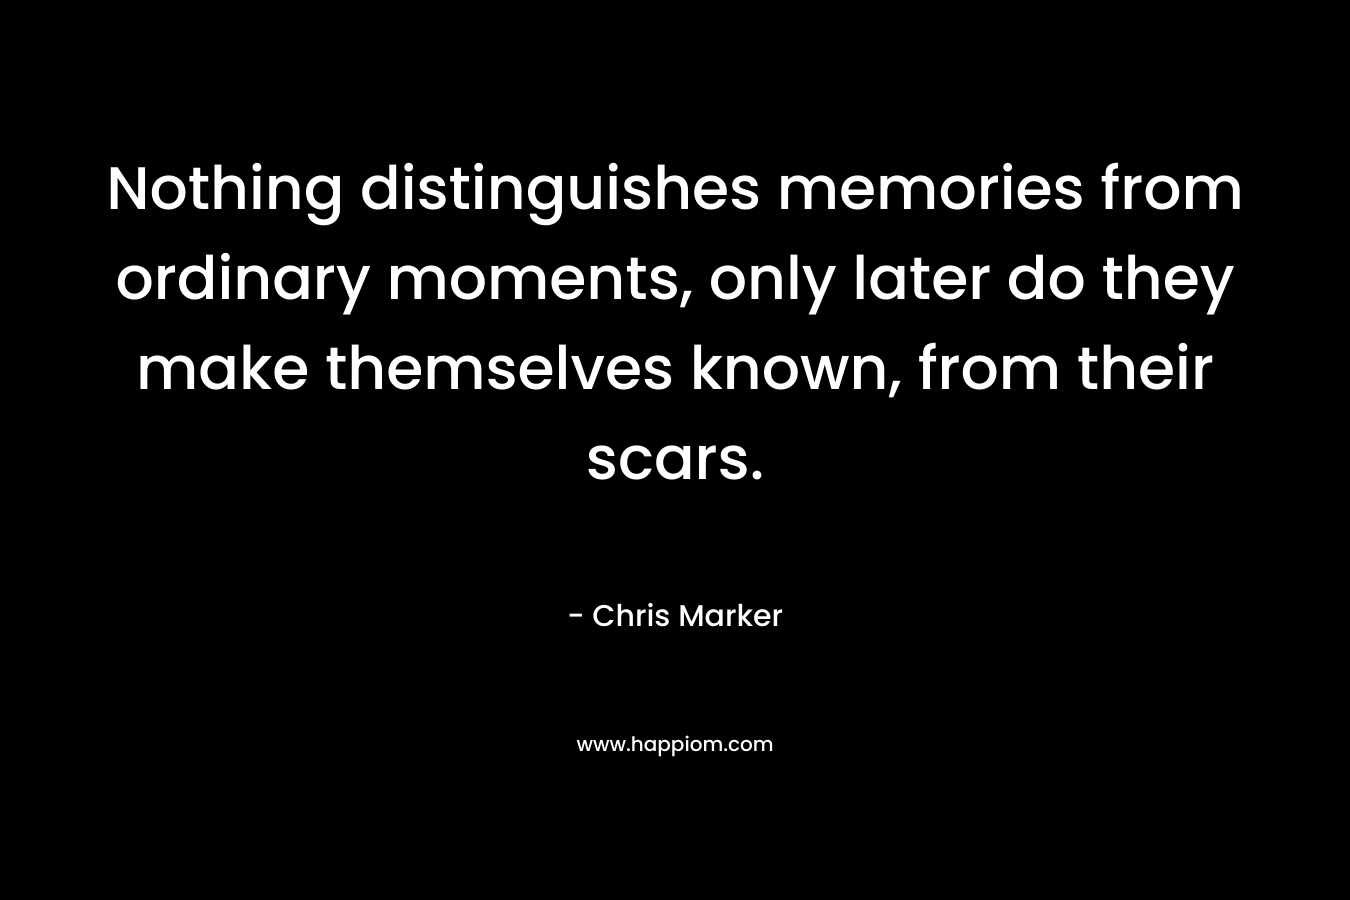 Nothing distinguishes memories from ordinary moments, only later do they make themselves known, from their scars.